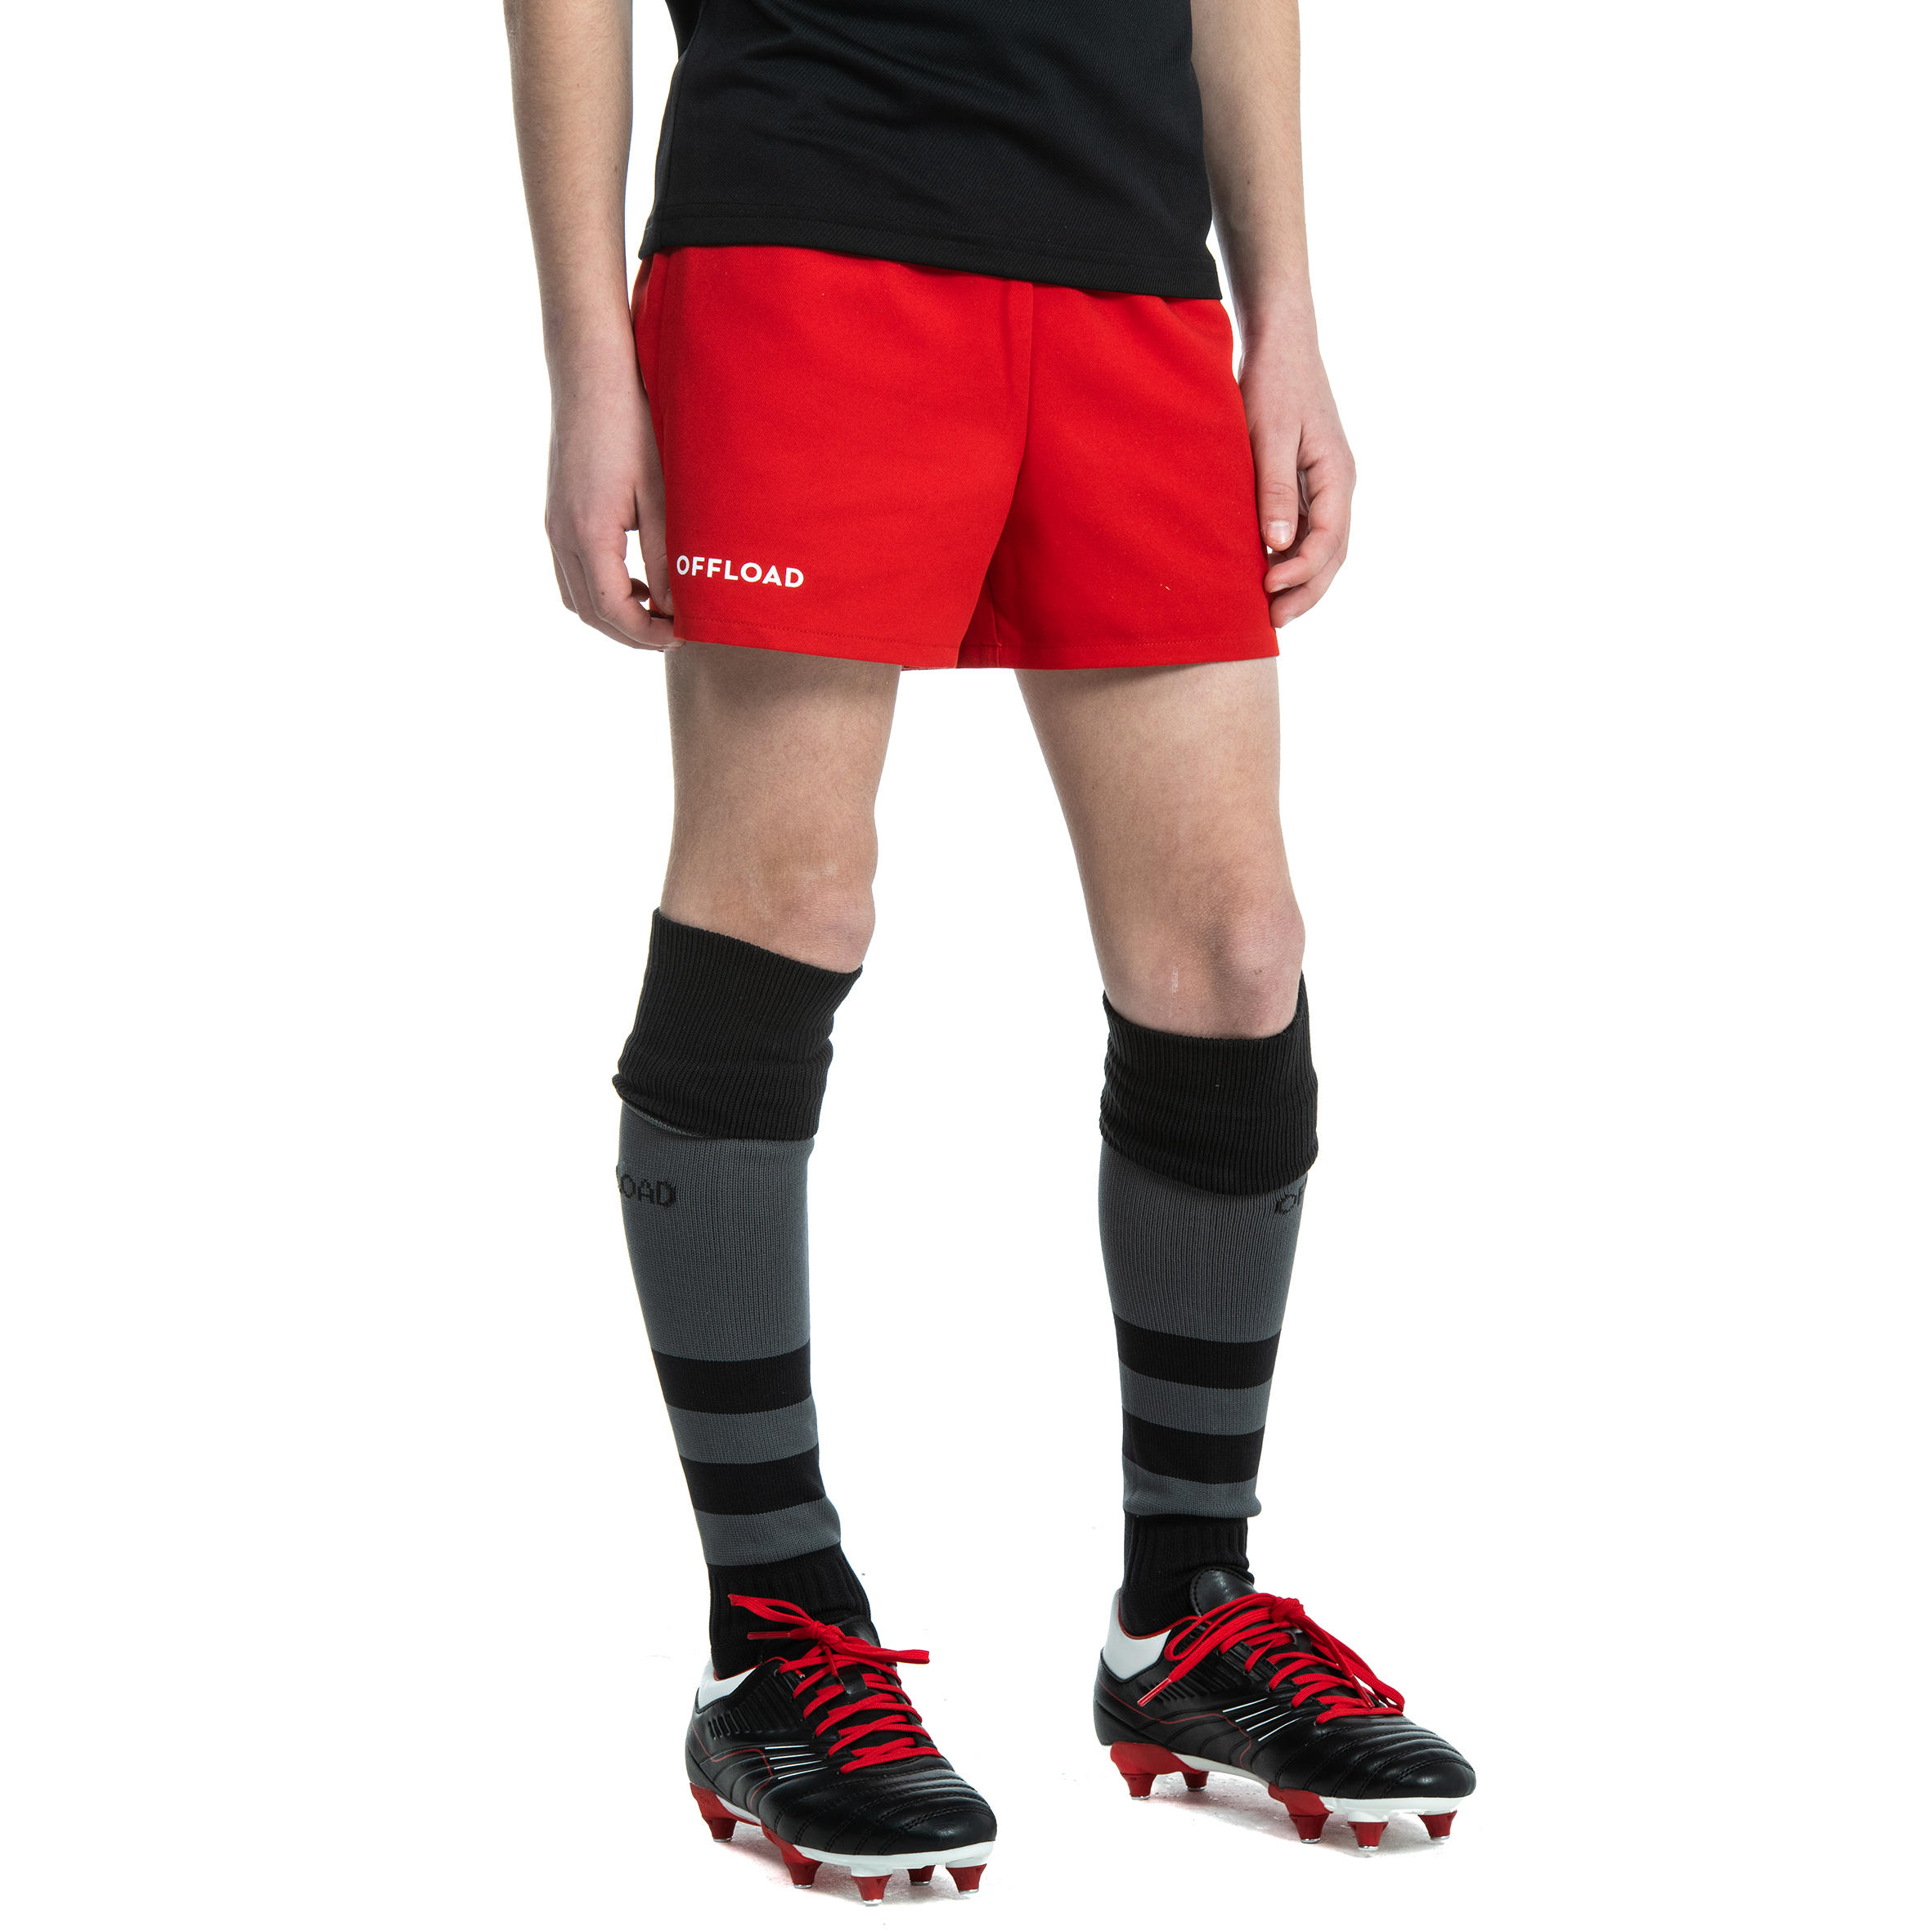 Kids' Rugby Shorts with Pockets R100 - Red 5/7